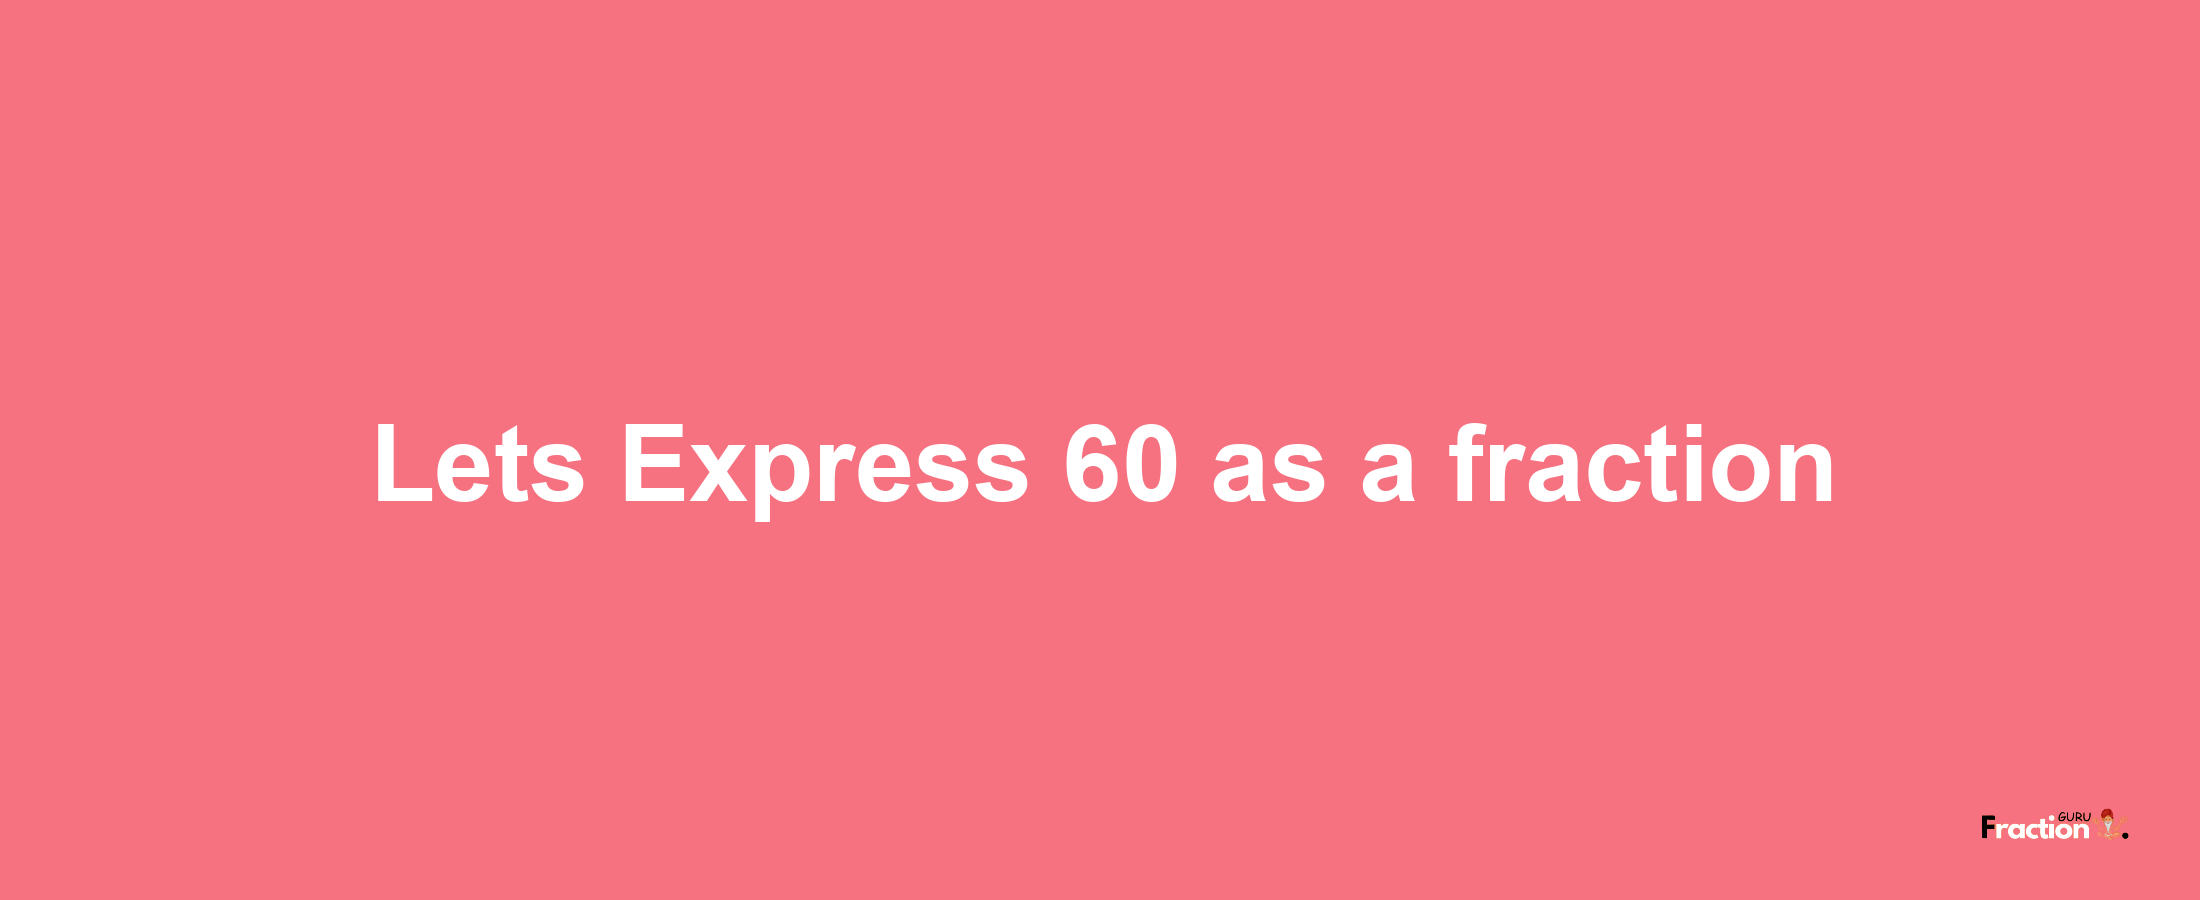 Lets Express 60 as afraction